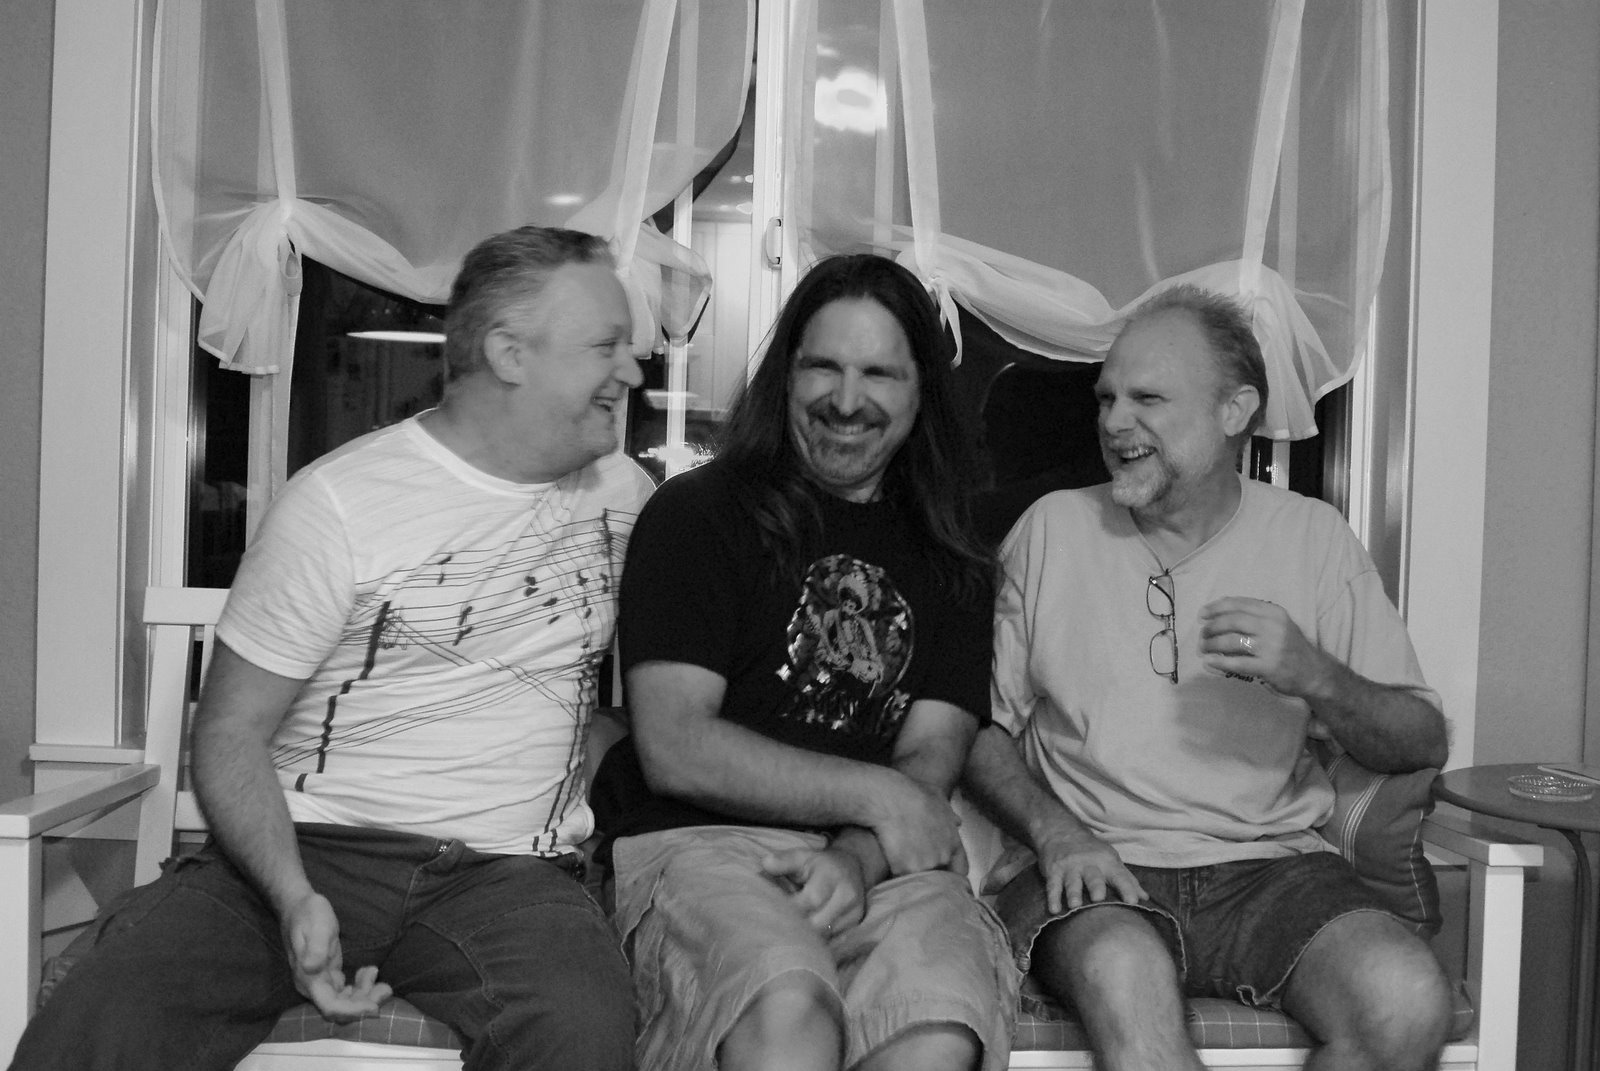 [Rob,+Dave+&+Terry+laughing.jpg]